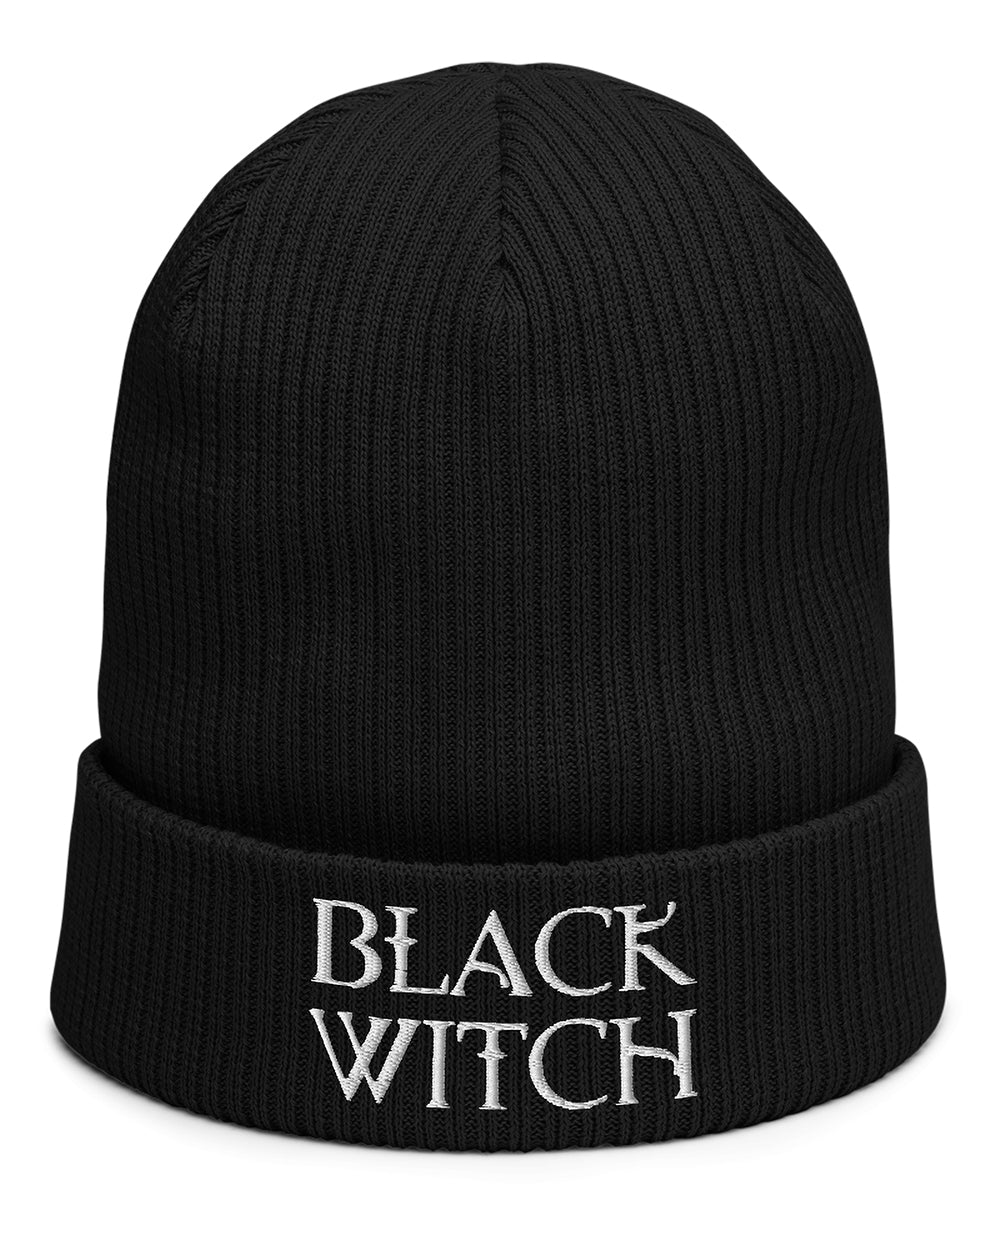 Black Witch Beanie - Embroidered Knit Hats for Women Goth Men Accessories Grunge Aesthetic Dark Academia